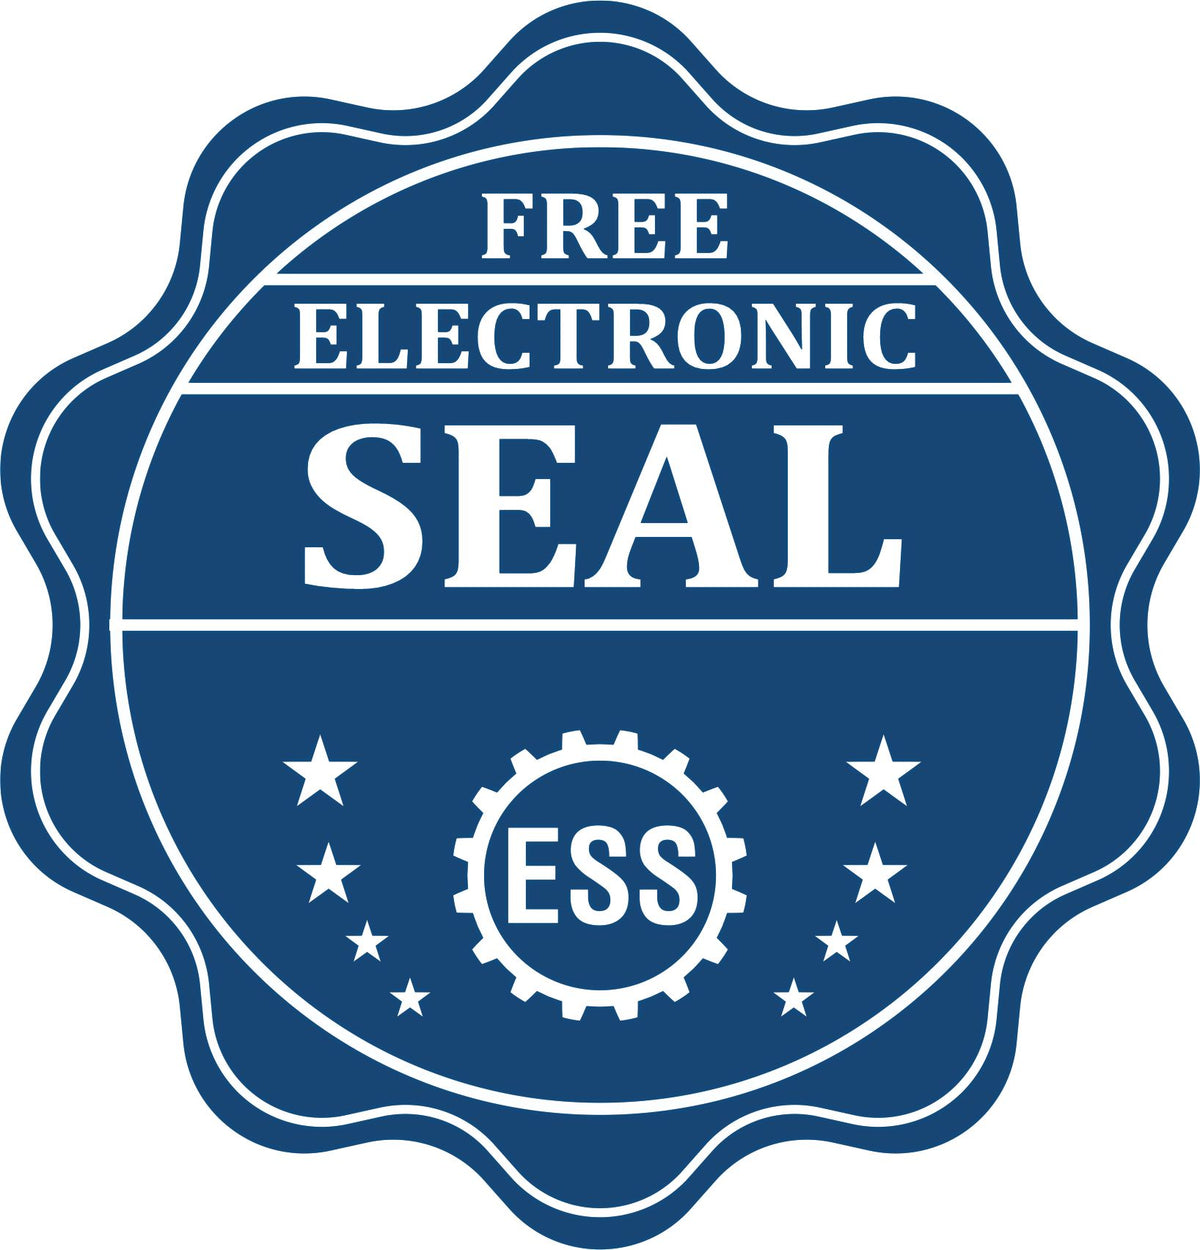 A badge showing a free electronic seal for the MaxLight Premium Pre-Inked Missouri Rectangular Notarial Stamp with stars and the ESS gear on the emblem.